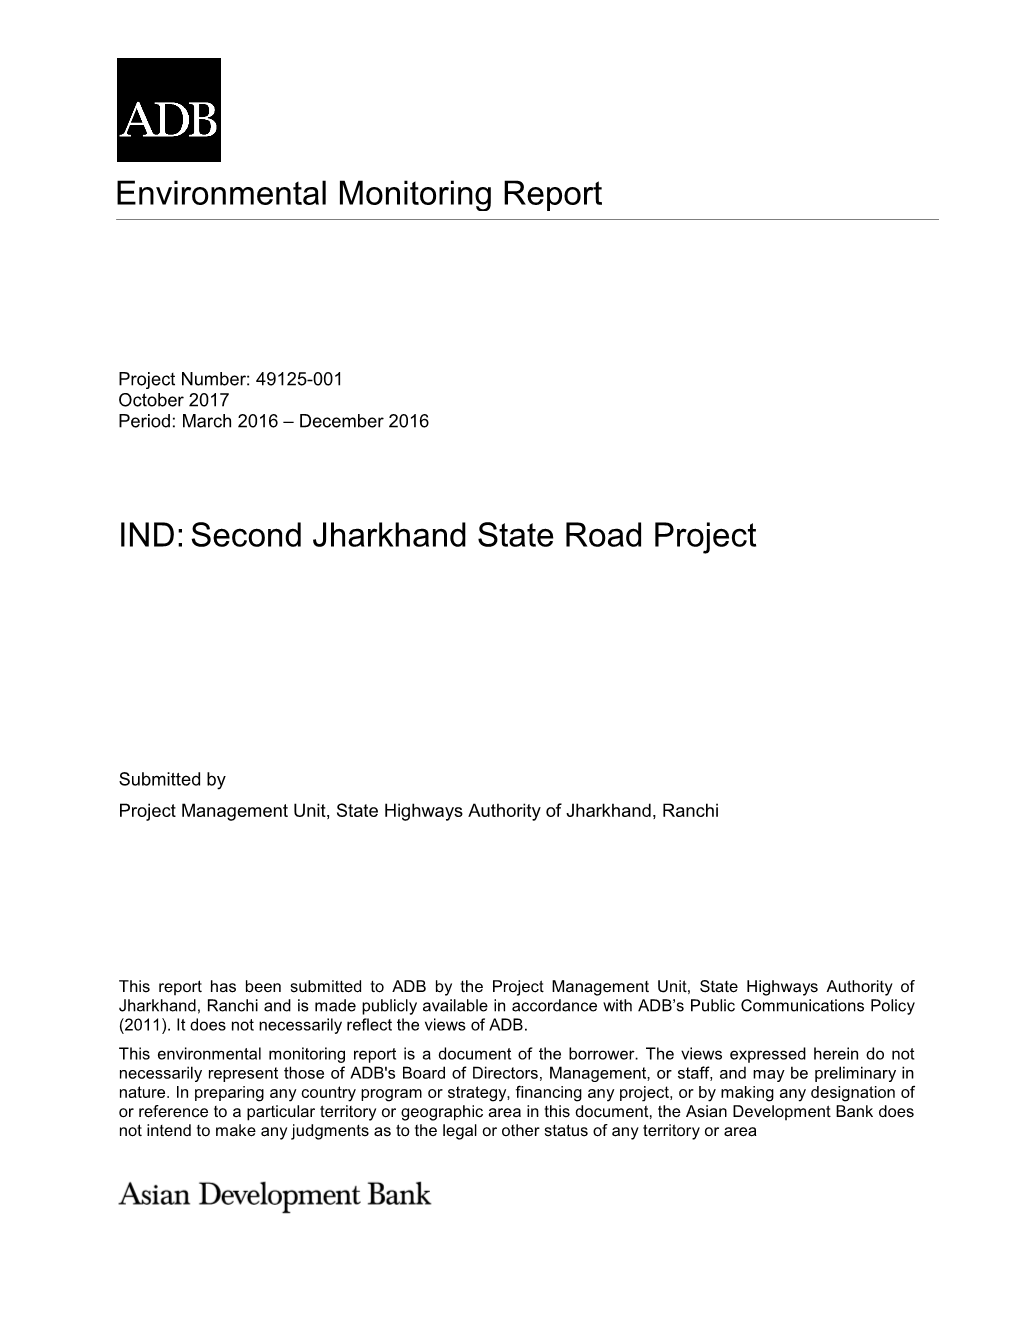 Environmental Monitoring Report IND:Second Jharkhand State Road